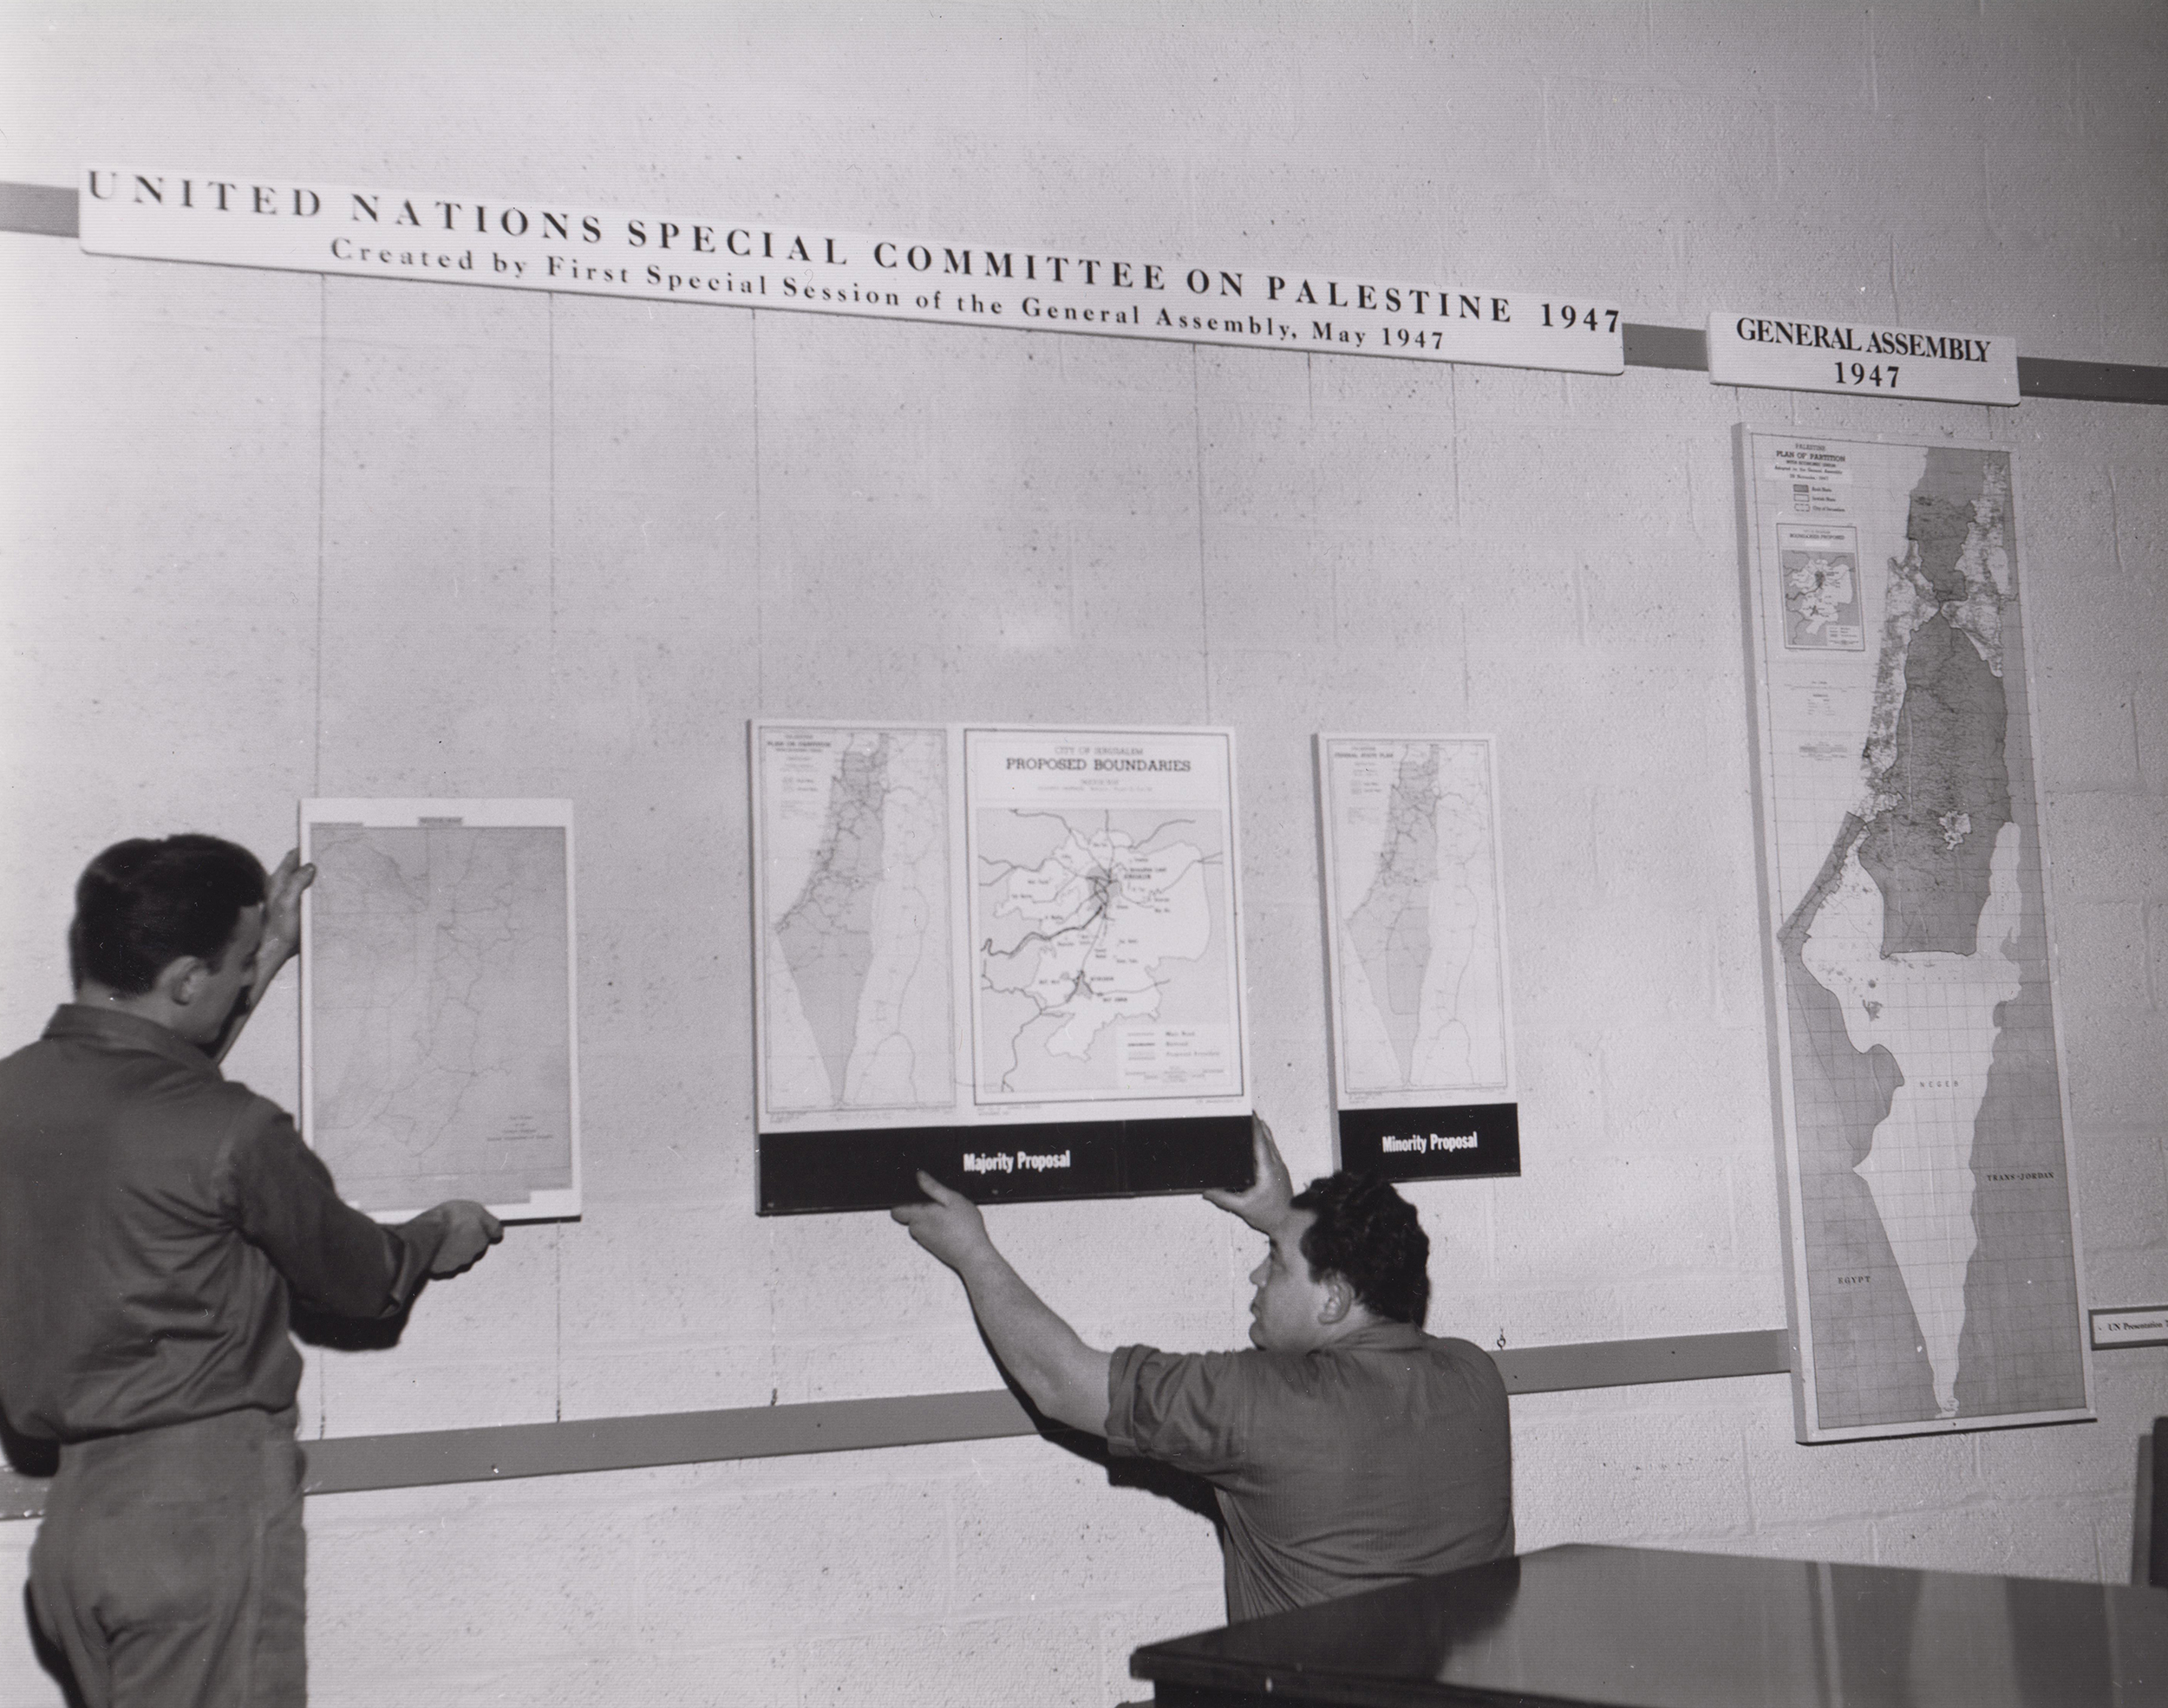 A black and white photo of two men installing boundary maps of Palestine. One is sitting and one is kneeling as they access the placement. Below the center trio of maps are two labels that read “Majority Proposal” and “Minority Proposal”. Above the row of maps is a portion of a timeline. The timeline reads "UNITED NATIONS SPECIAL COMMITTEE ON PALESTINE 1947, Created by First Special Session of the General Assembly, May 1947” and “GENERAL ASSEMBLY 1947”.